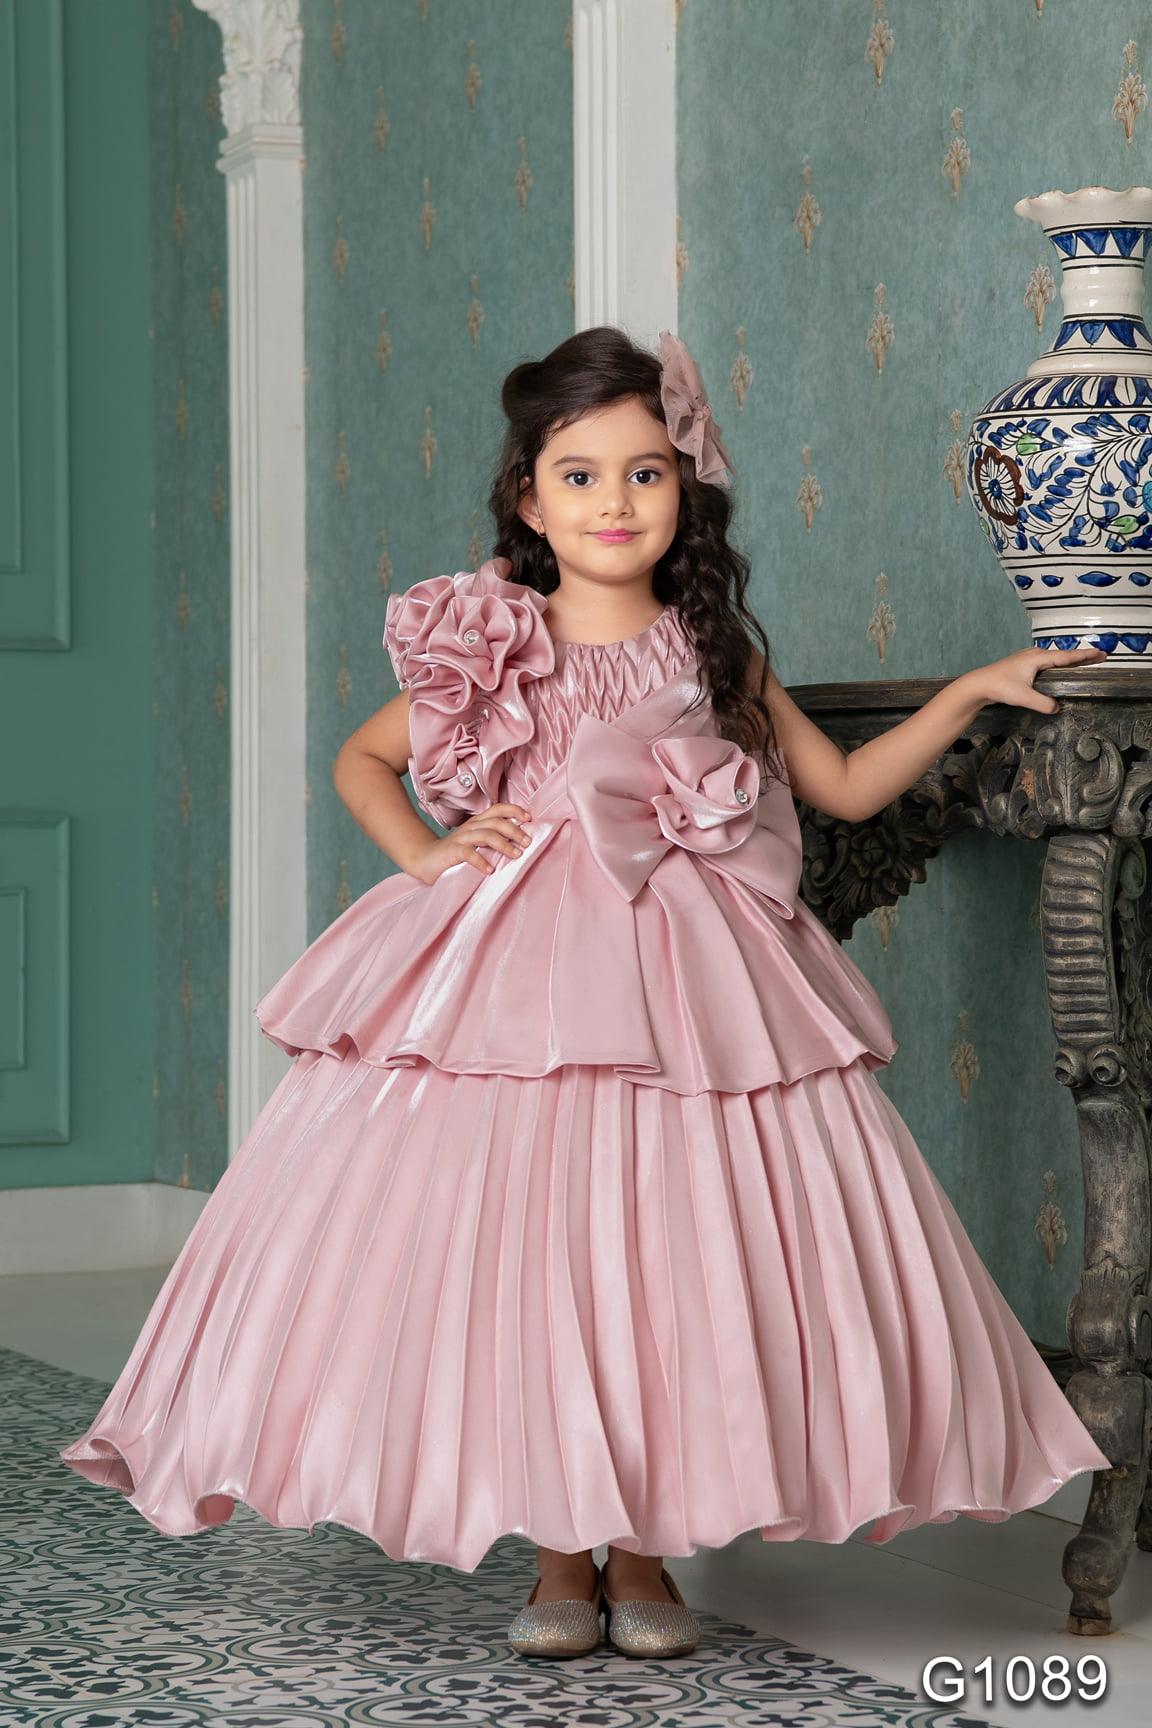 Designer Peach Satin Full Length Layered Gown With Embellished Flower For Girls - Lagorii Kids